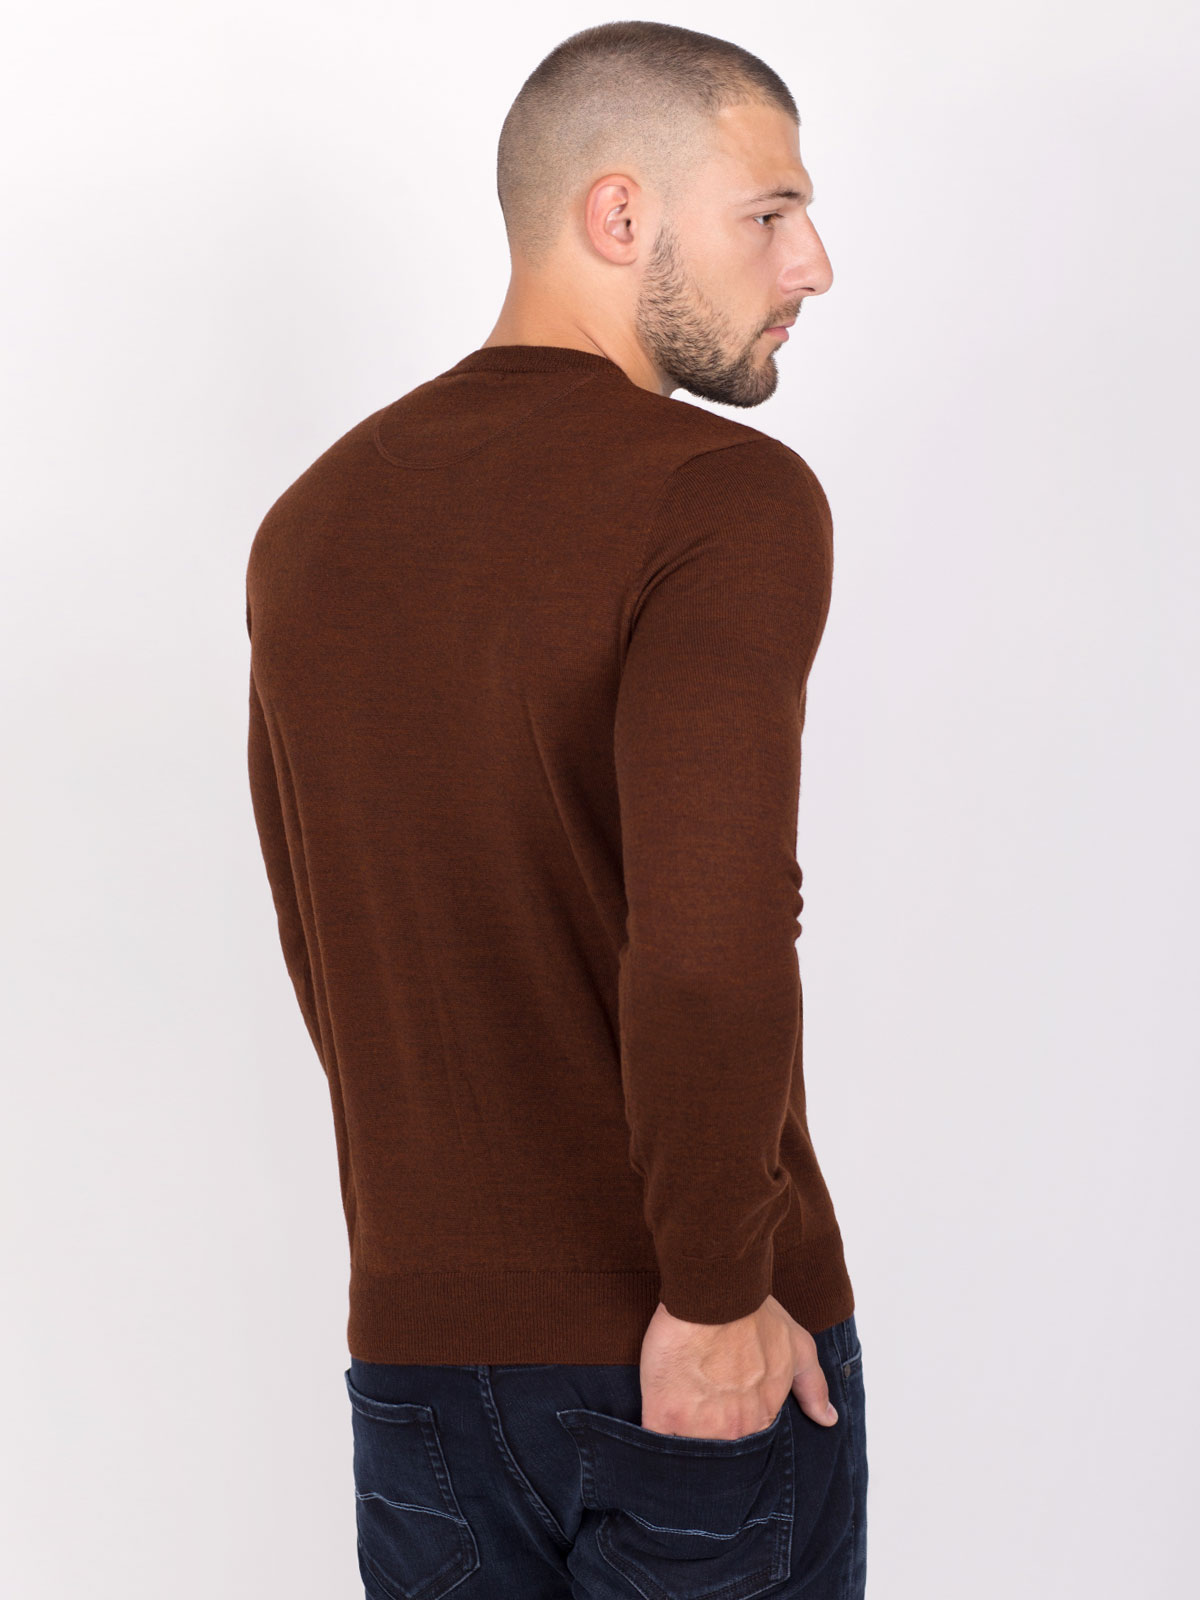 Tilecolored sweater - 33090 € 27.56 img4